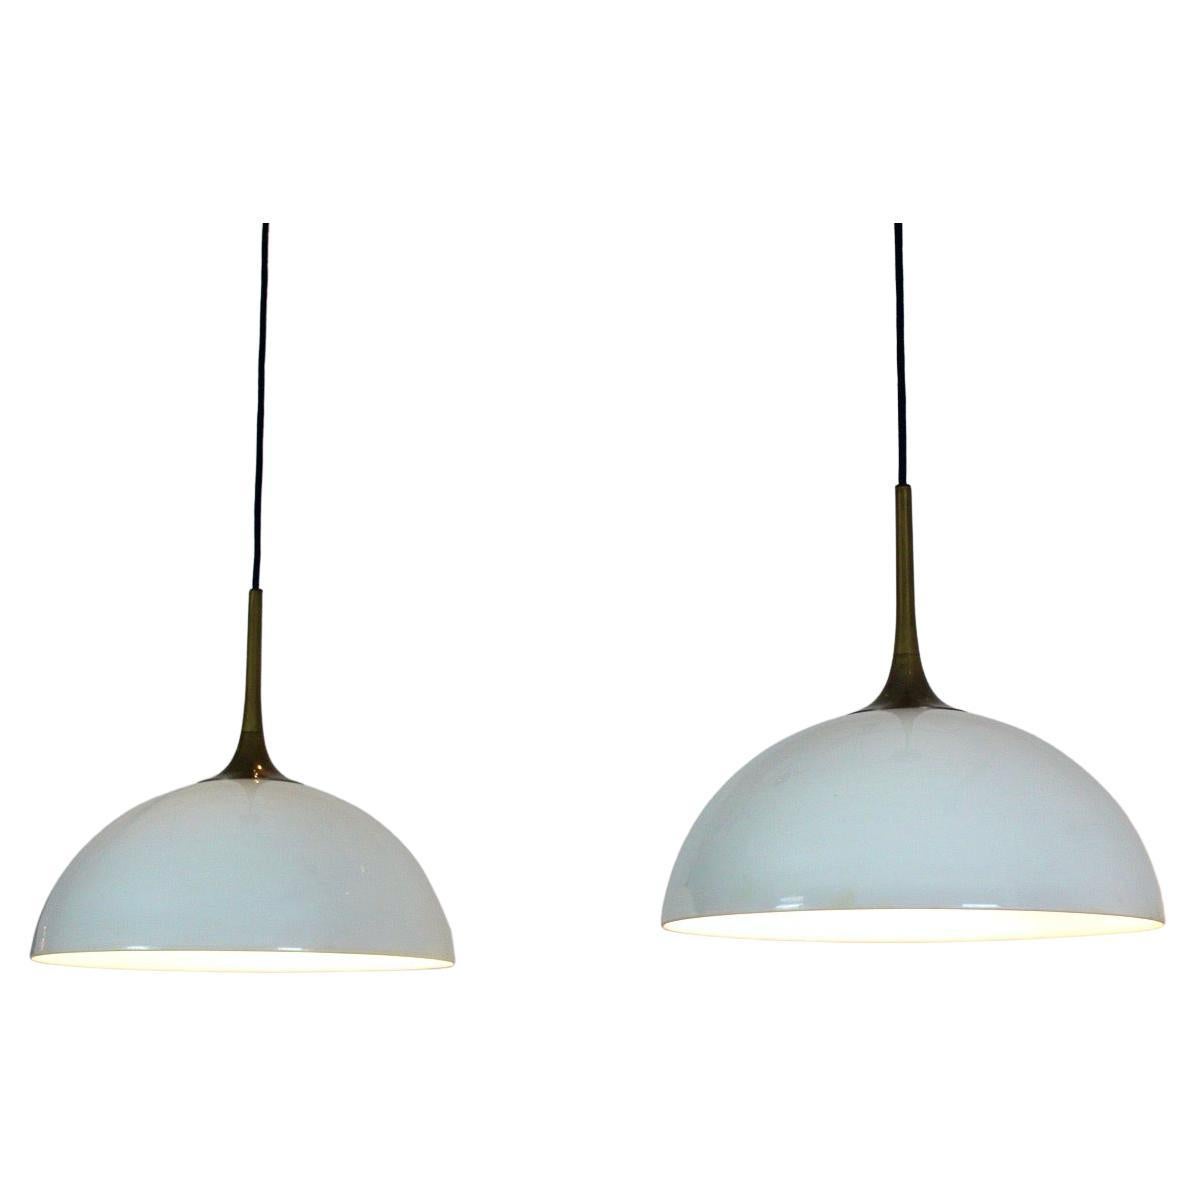 Elegant Pair of Brass and White-Opal Glass Pendant Lights by Florian Schulz